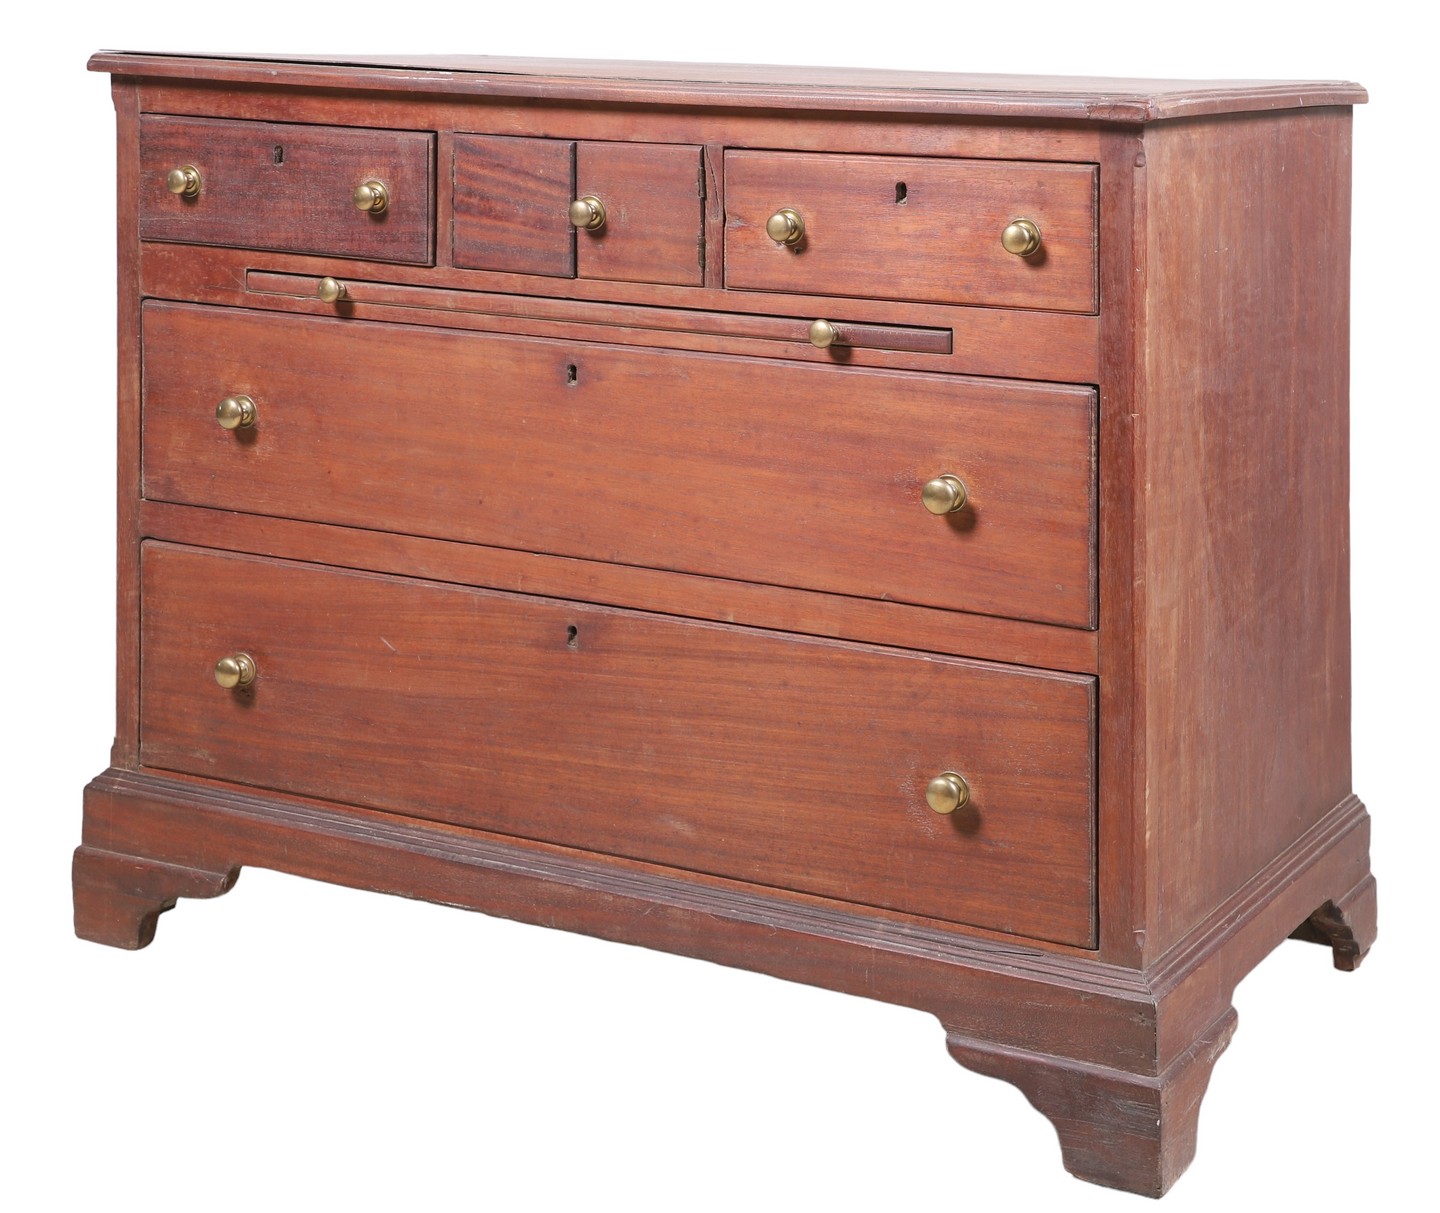 Mahogany chest of drawers, top with